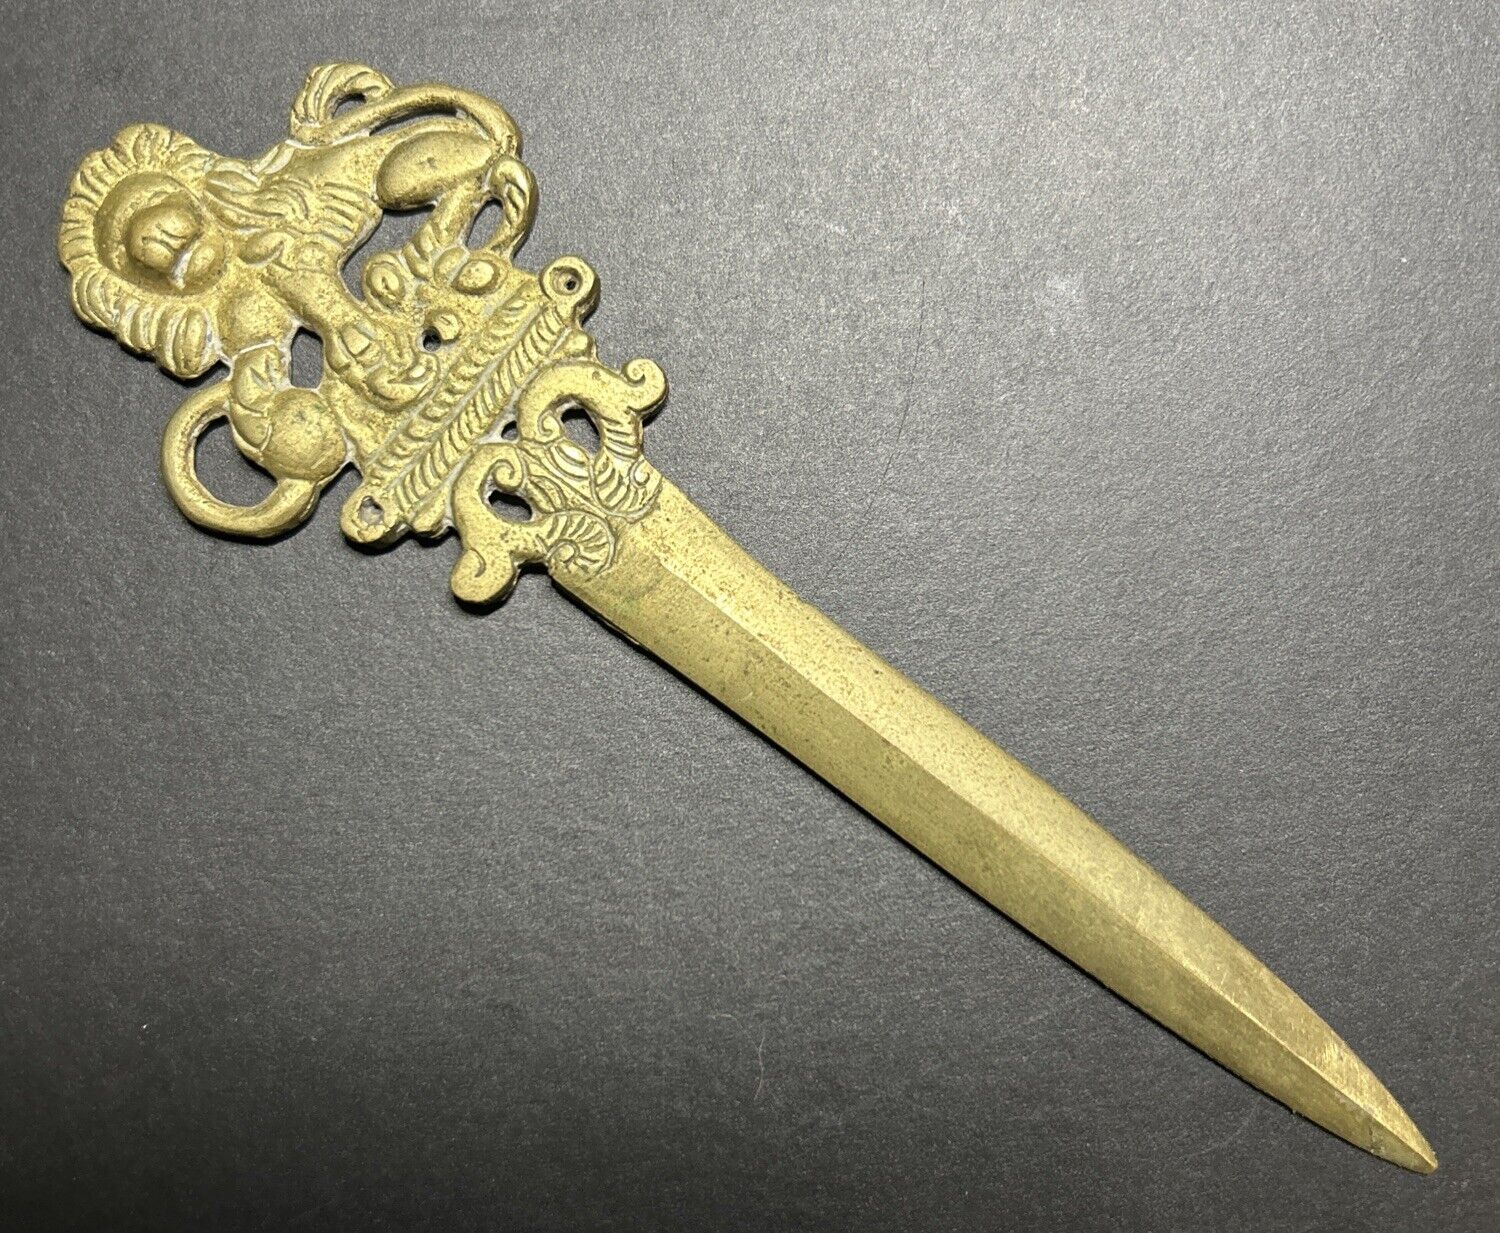 Antique Lion With Foot On Ball Bronze Letter Opener Looks Sand Casted Gorgeous